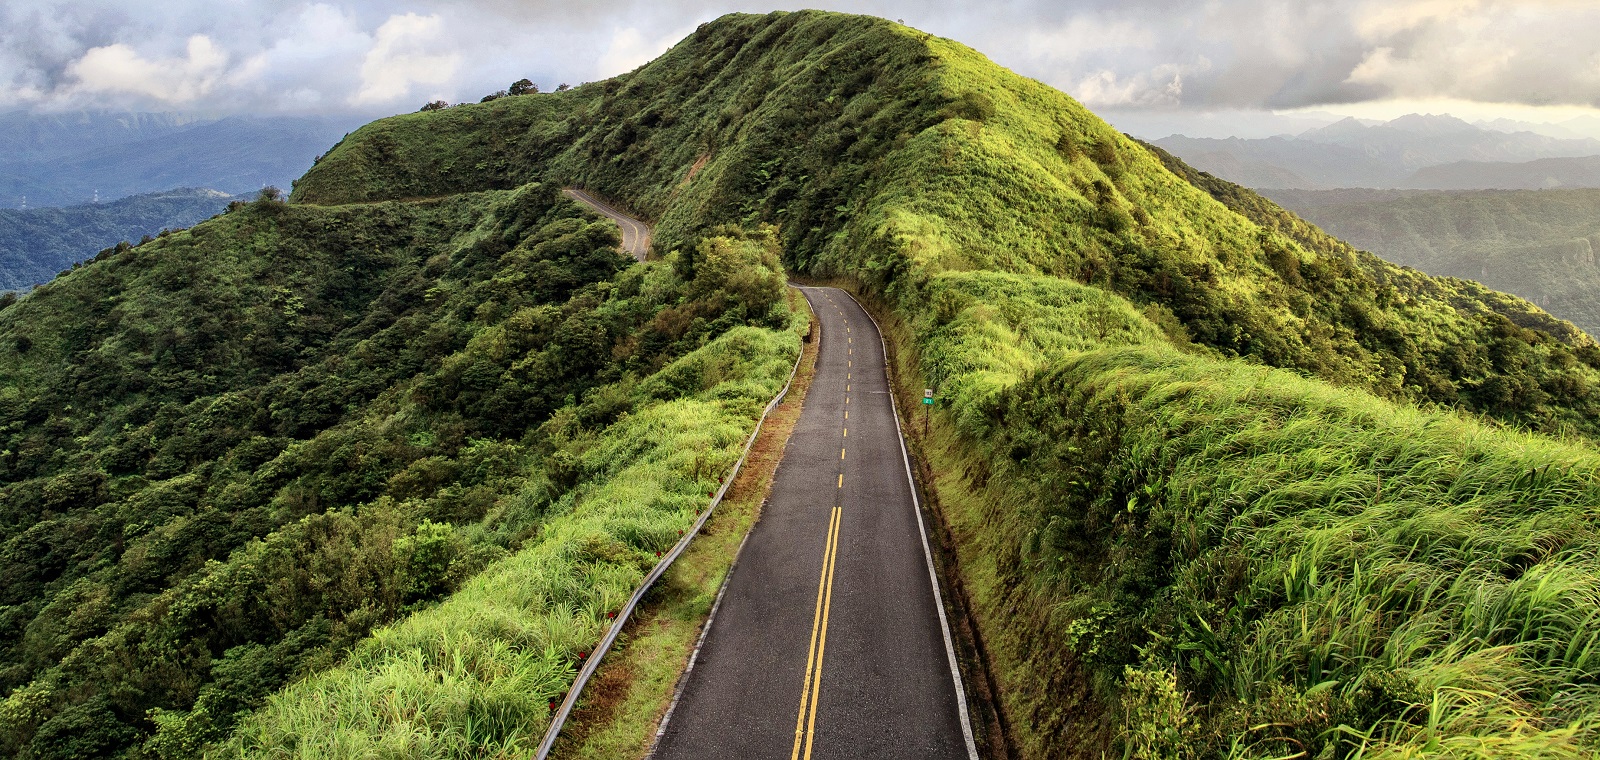 An uneven mountain roadway sharply winds through lush greenery against a cloudy sky